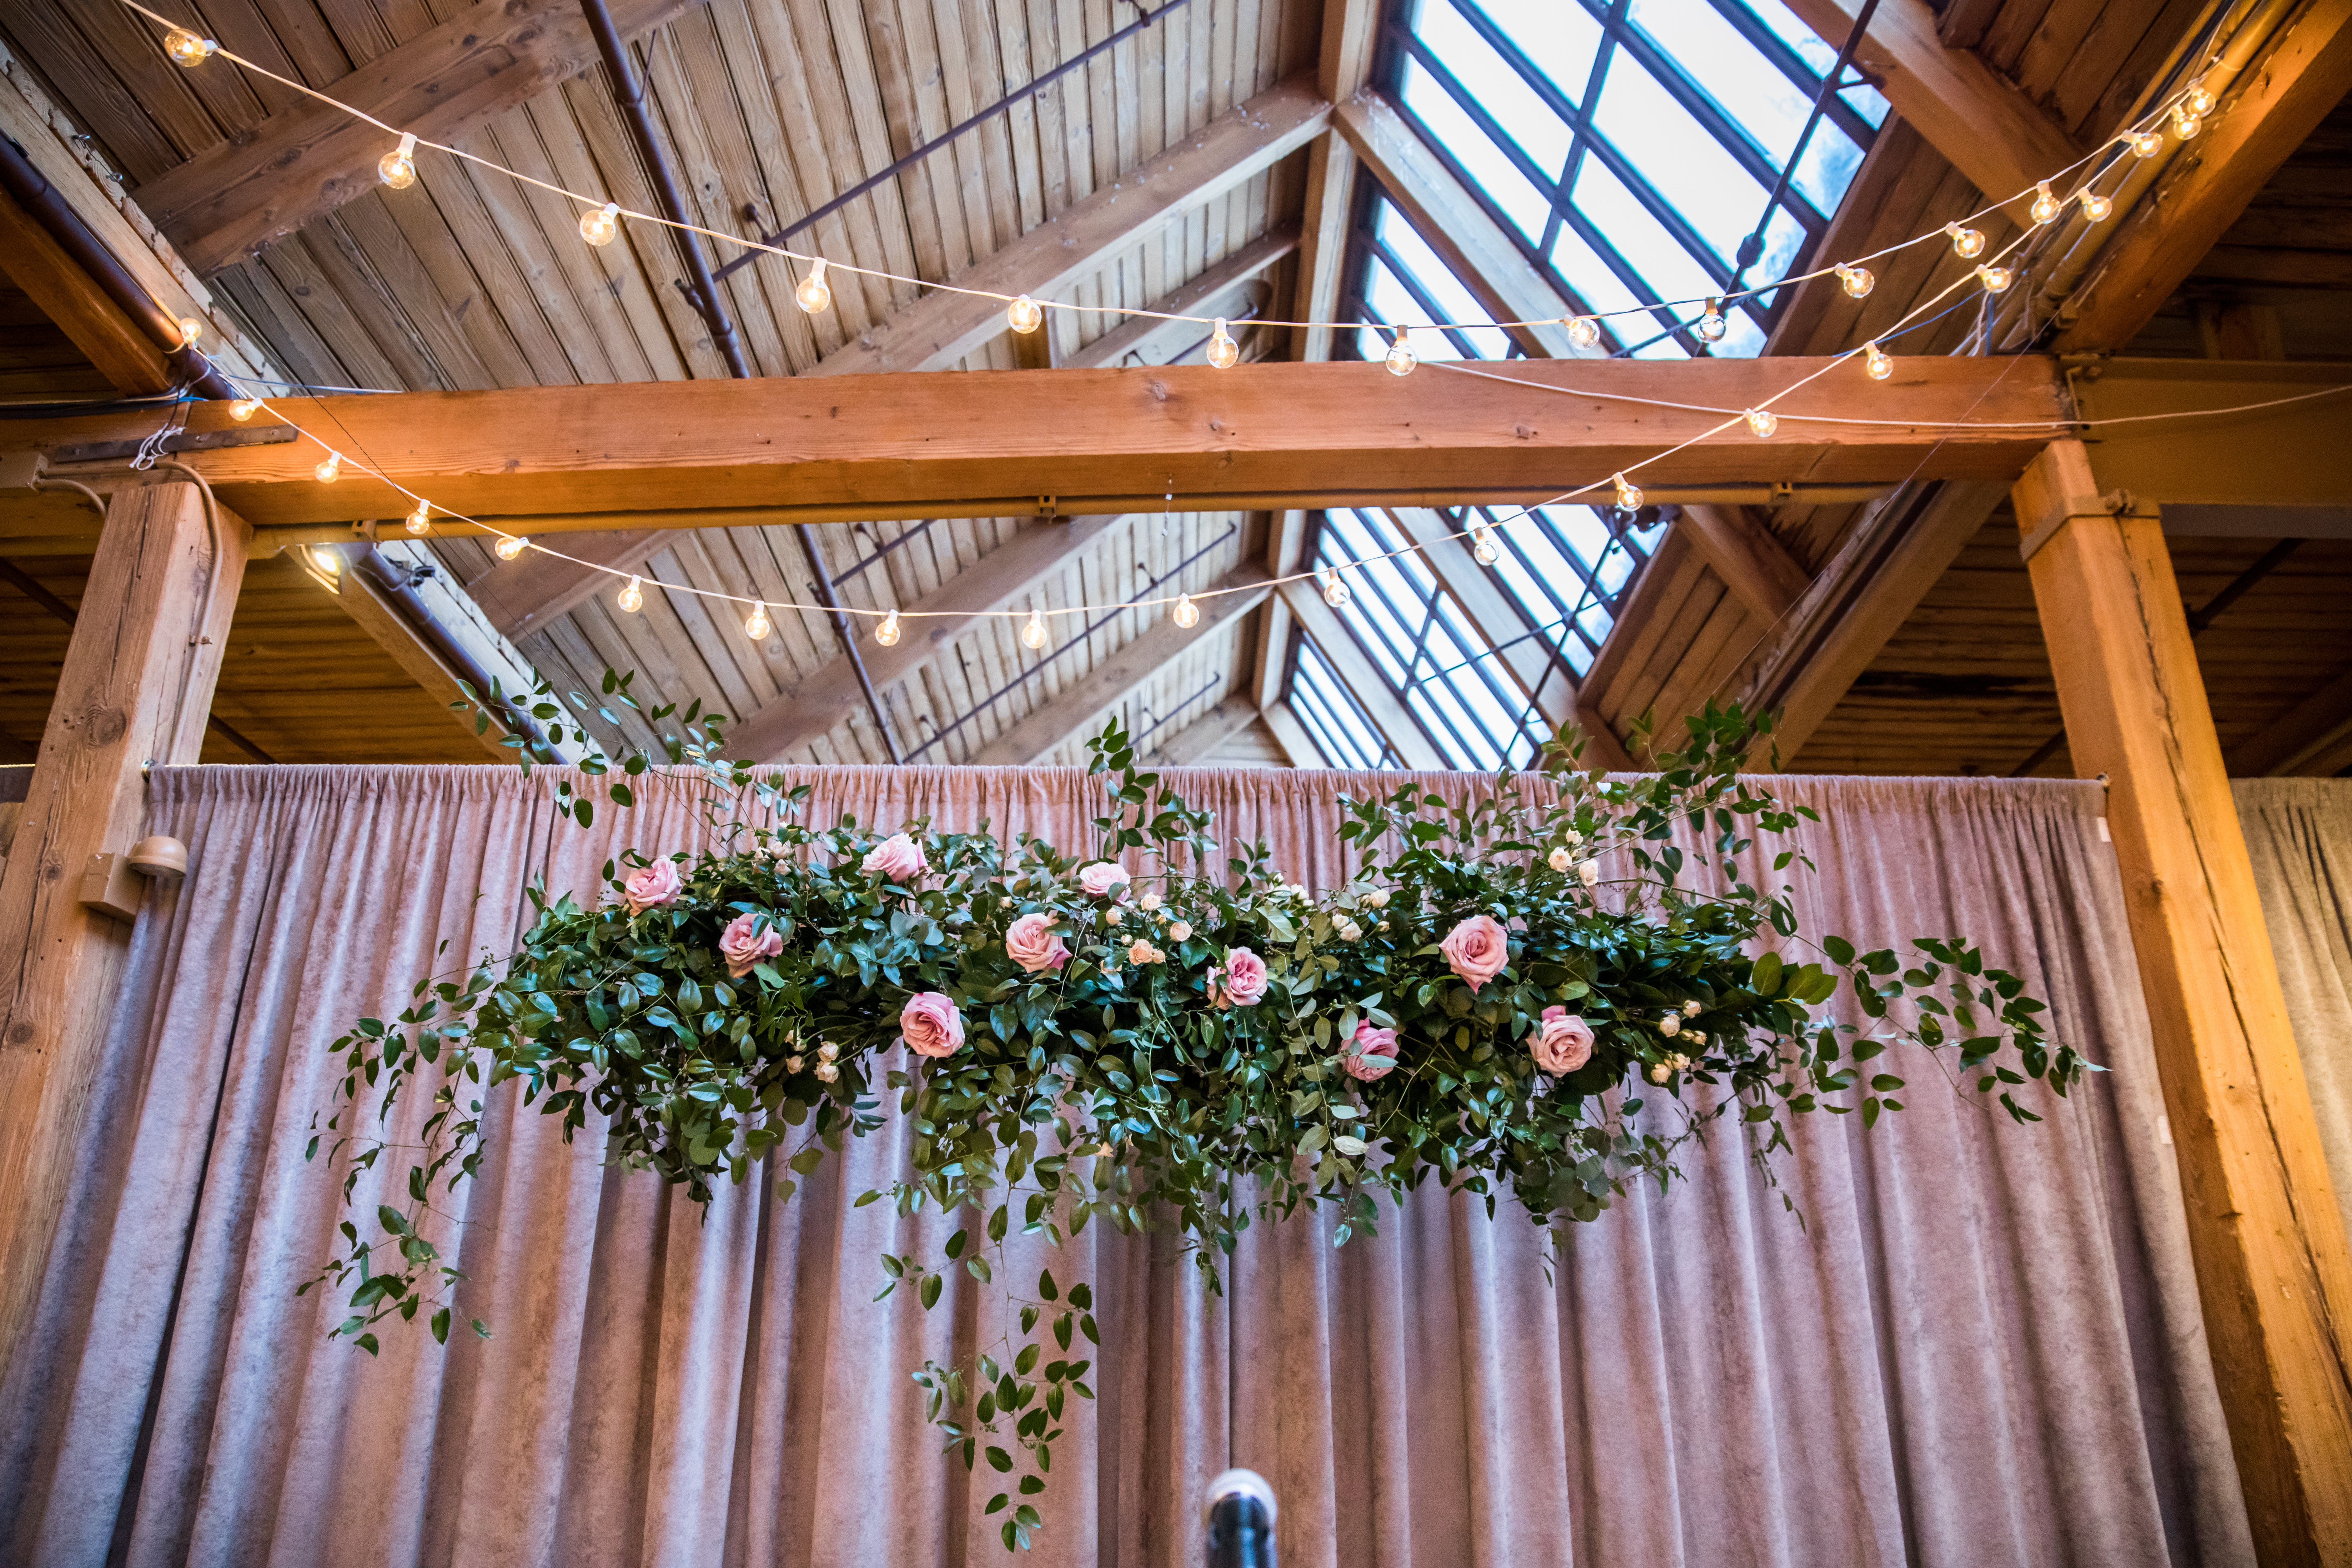 Bridgeport Art Center Skyline Loft for winter wedding with string lights and floating altar piece of pink garden roses and foliage on mauve background..